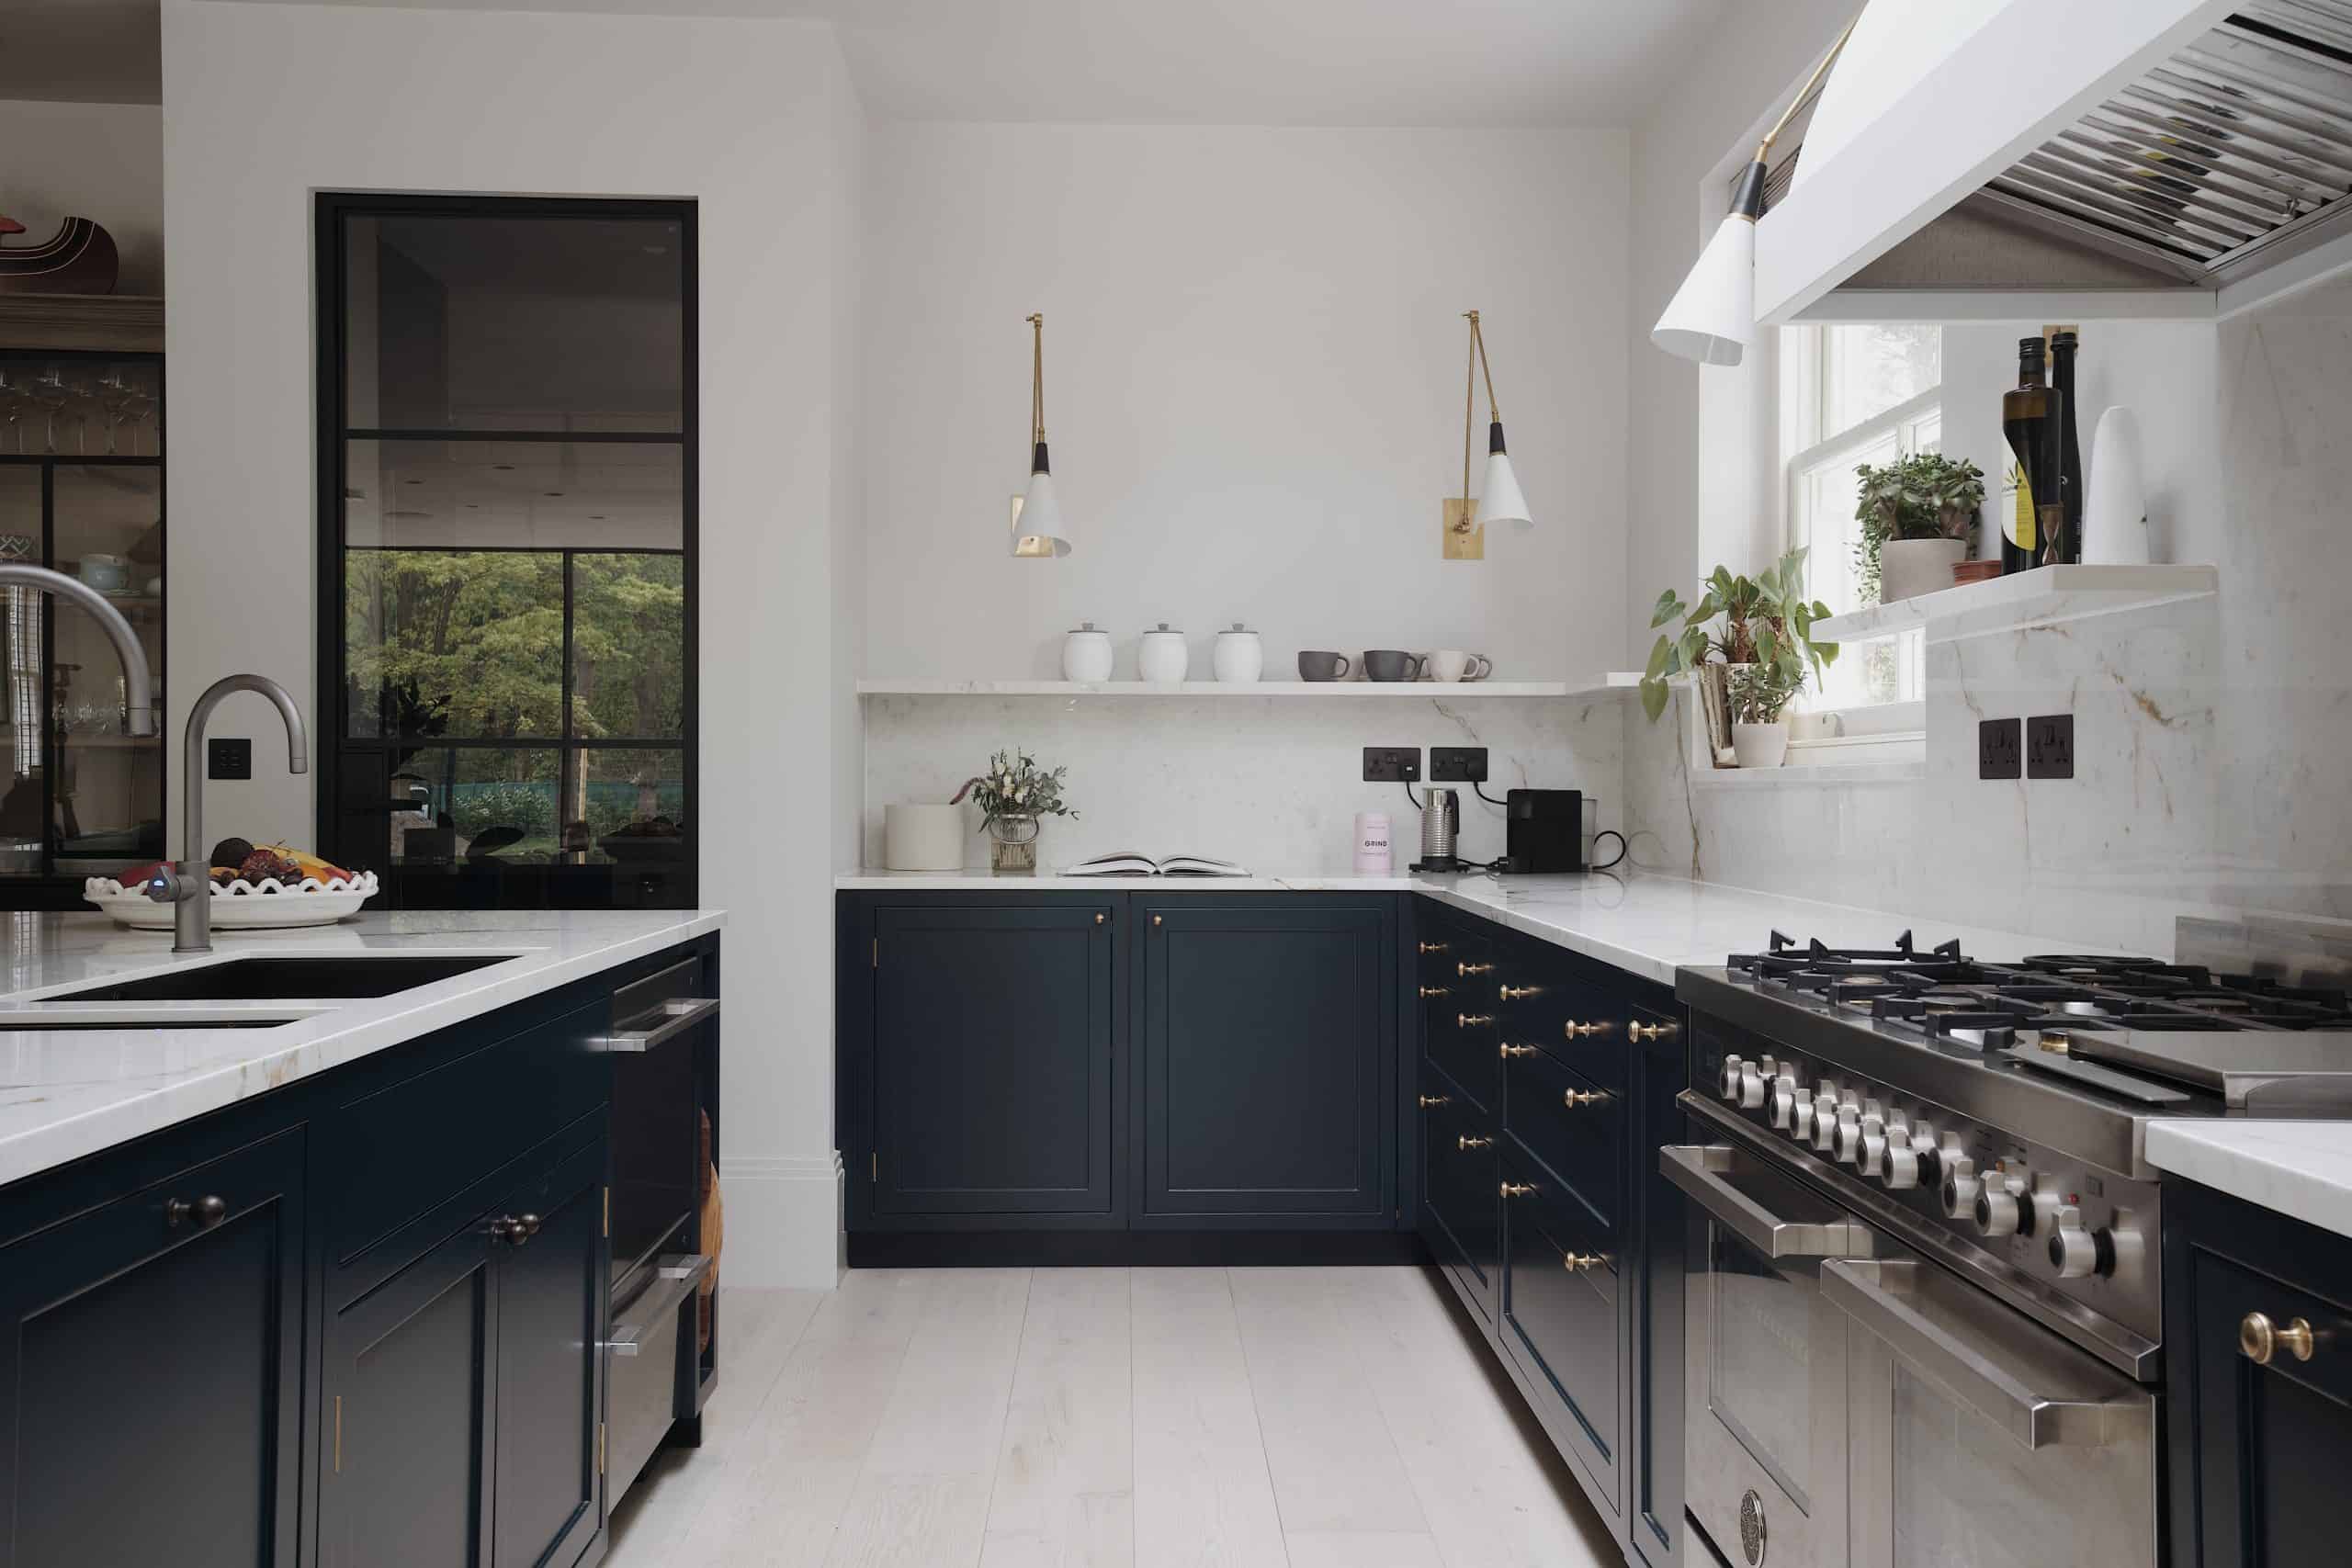 Choosing the right tiles for your kitchen - The Wood Works